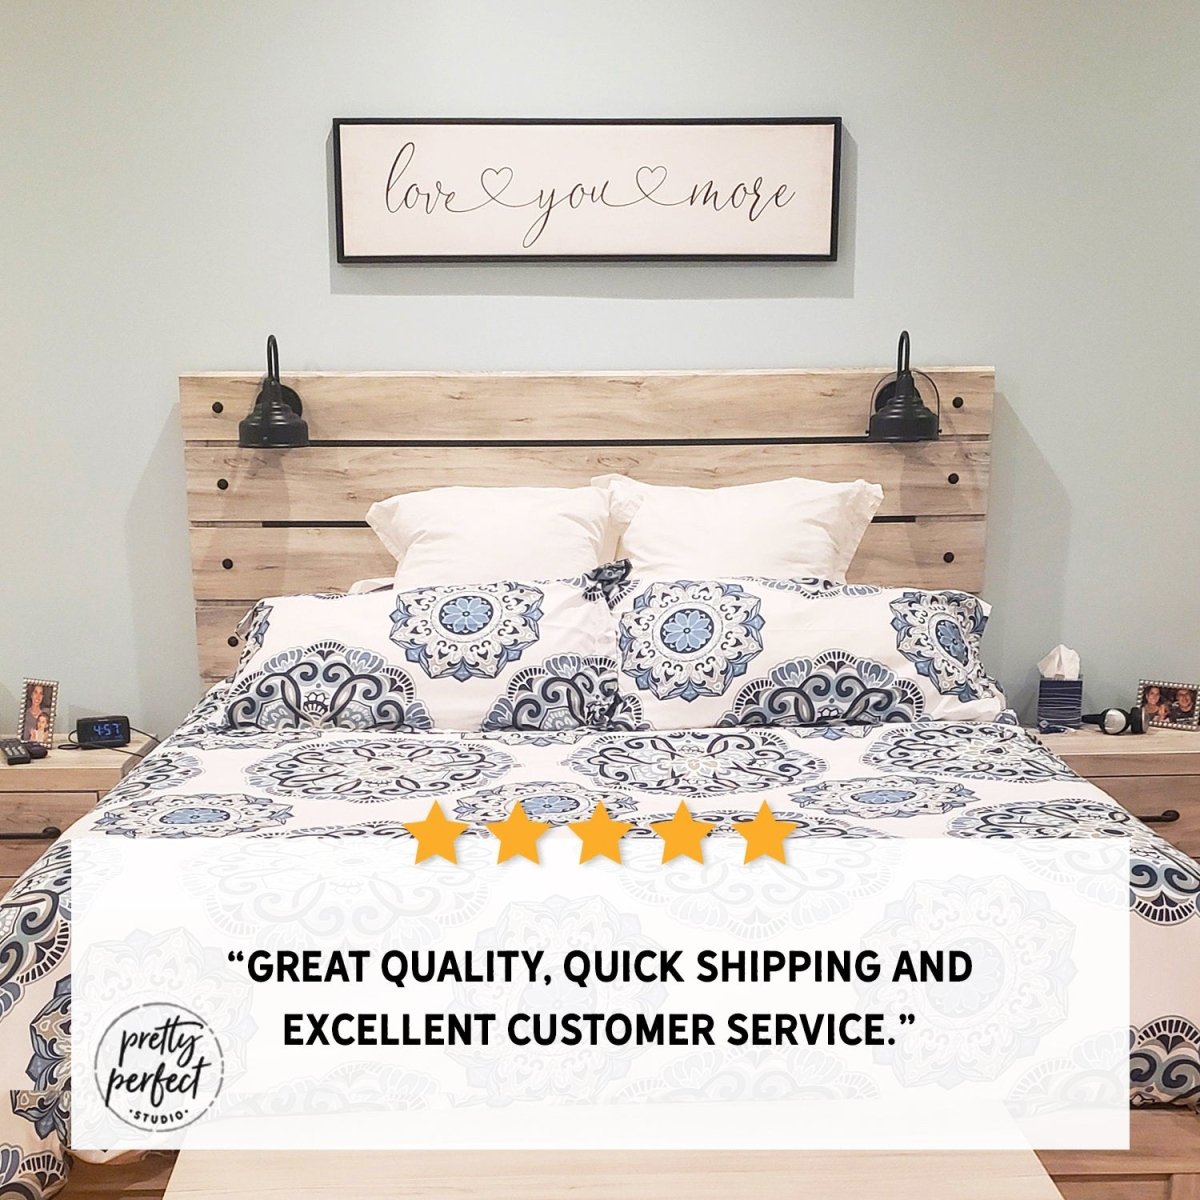 Customer product review for love you more sign by Pretty Perfect Studio